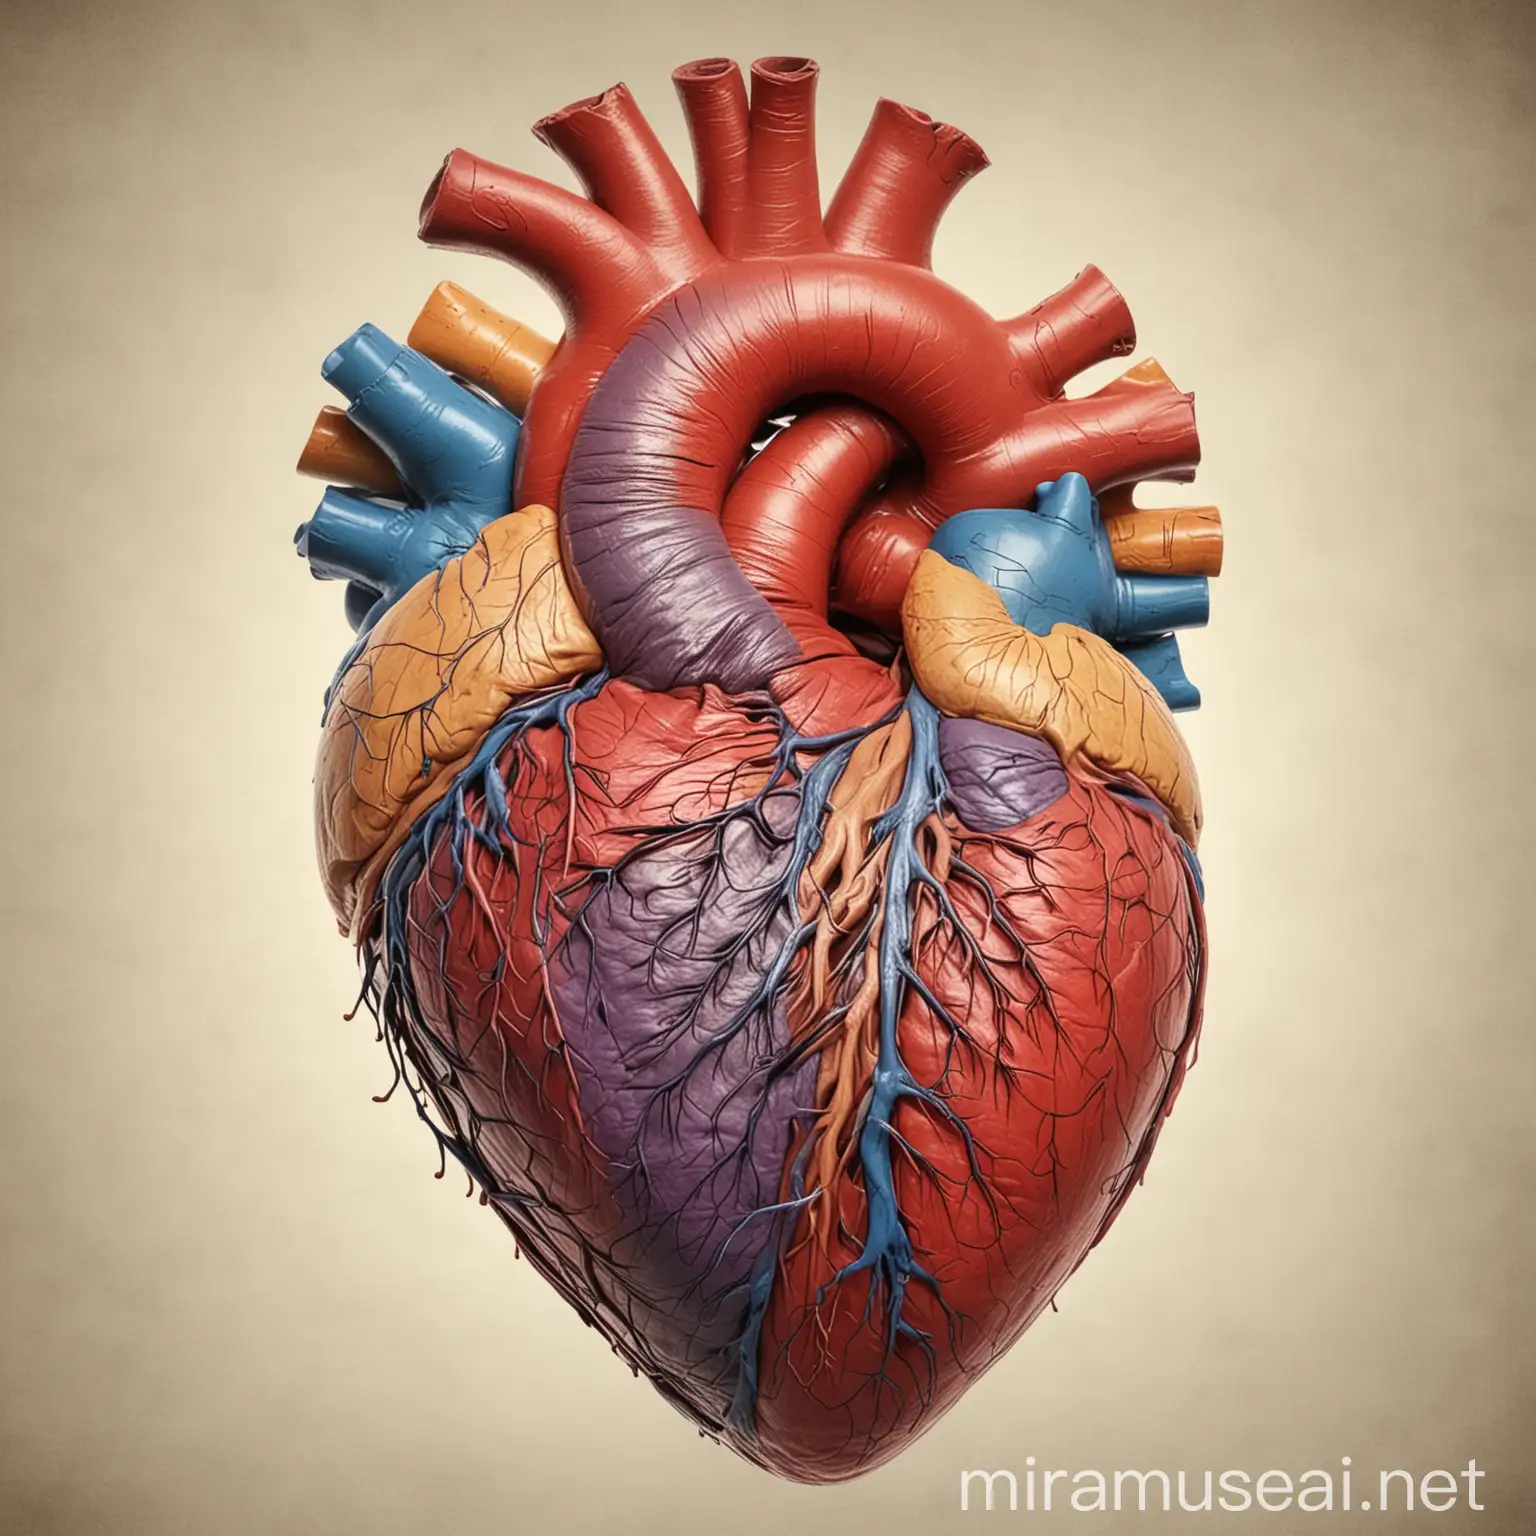 Vivid Illustrations of Human Heart Anatomy in Diverse Colors